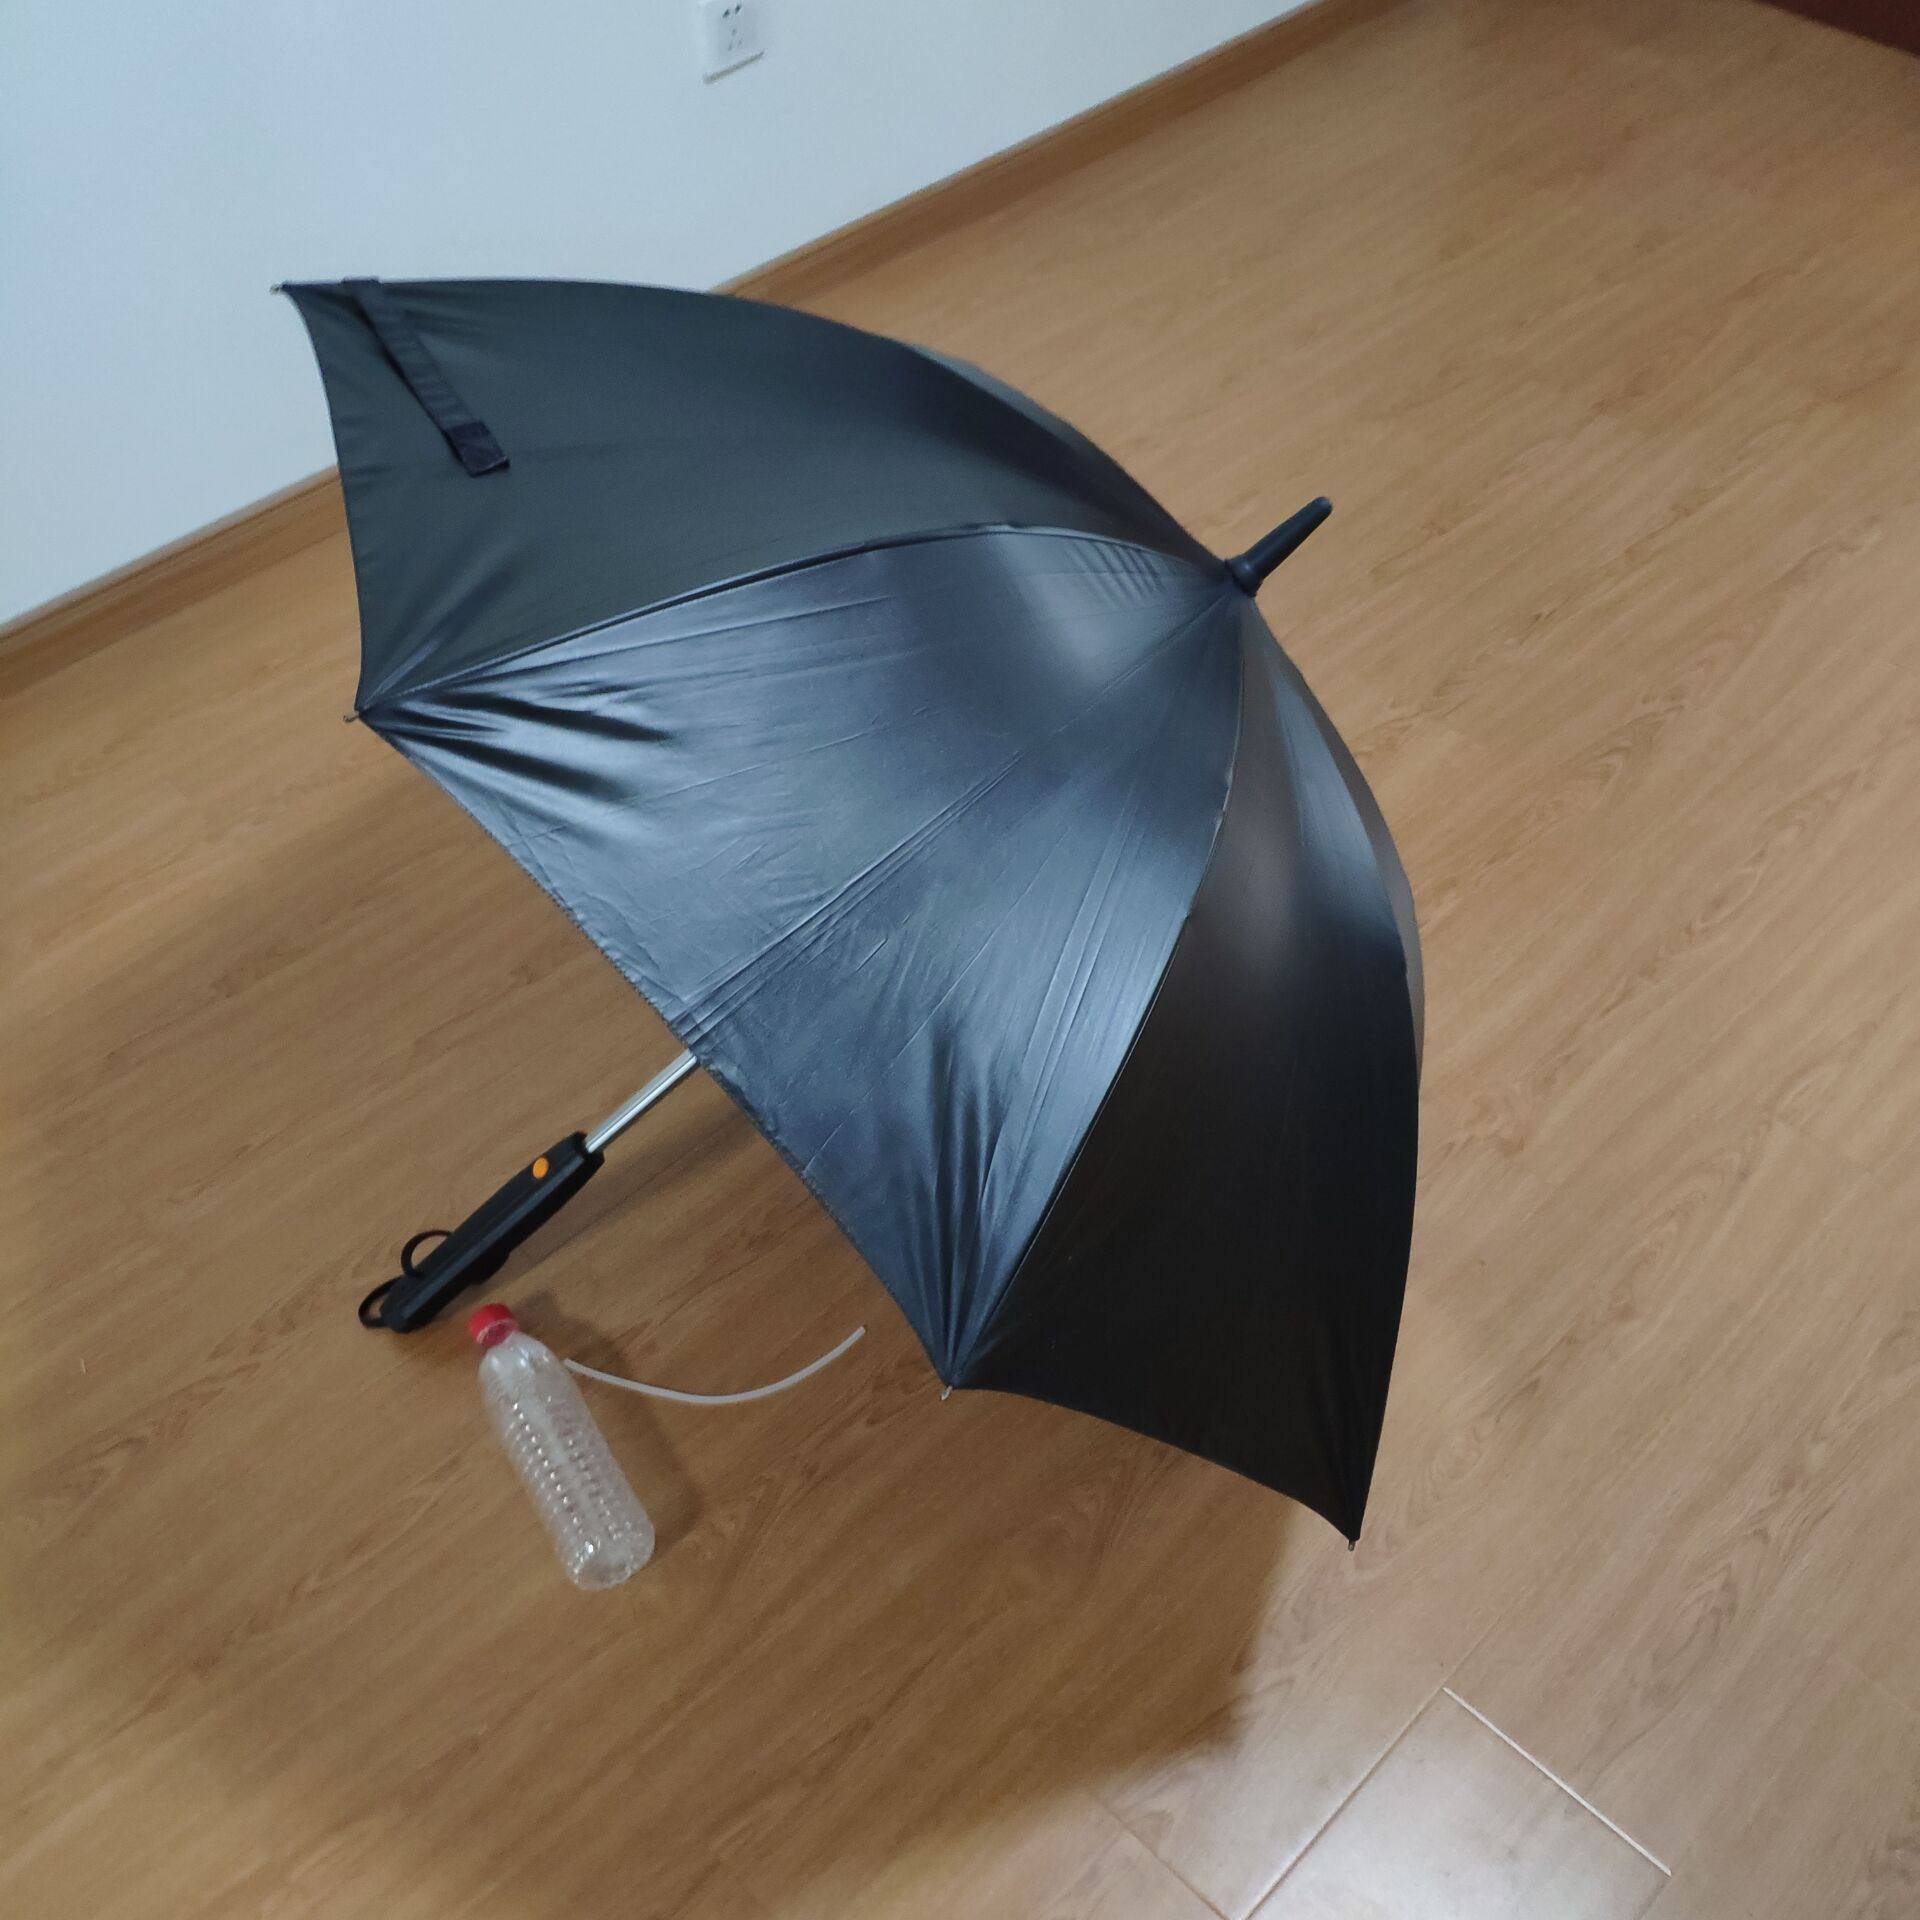 Umbrella with Fan and Mist Spray